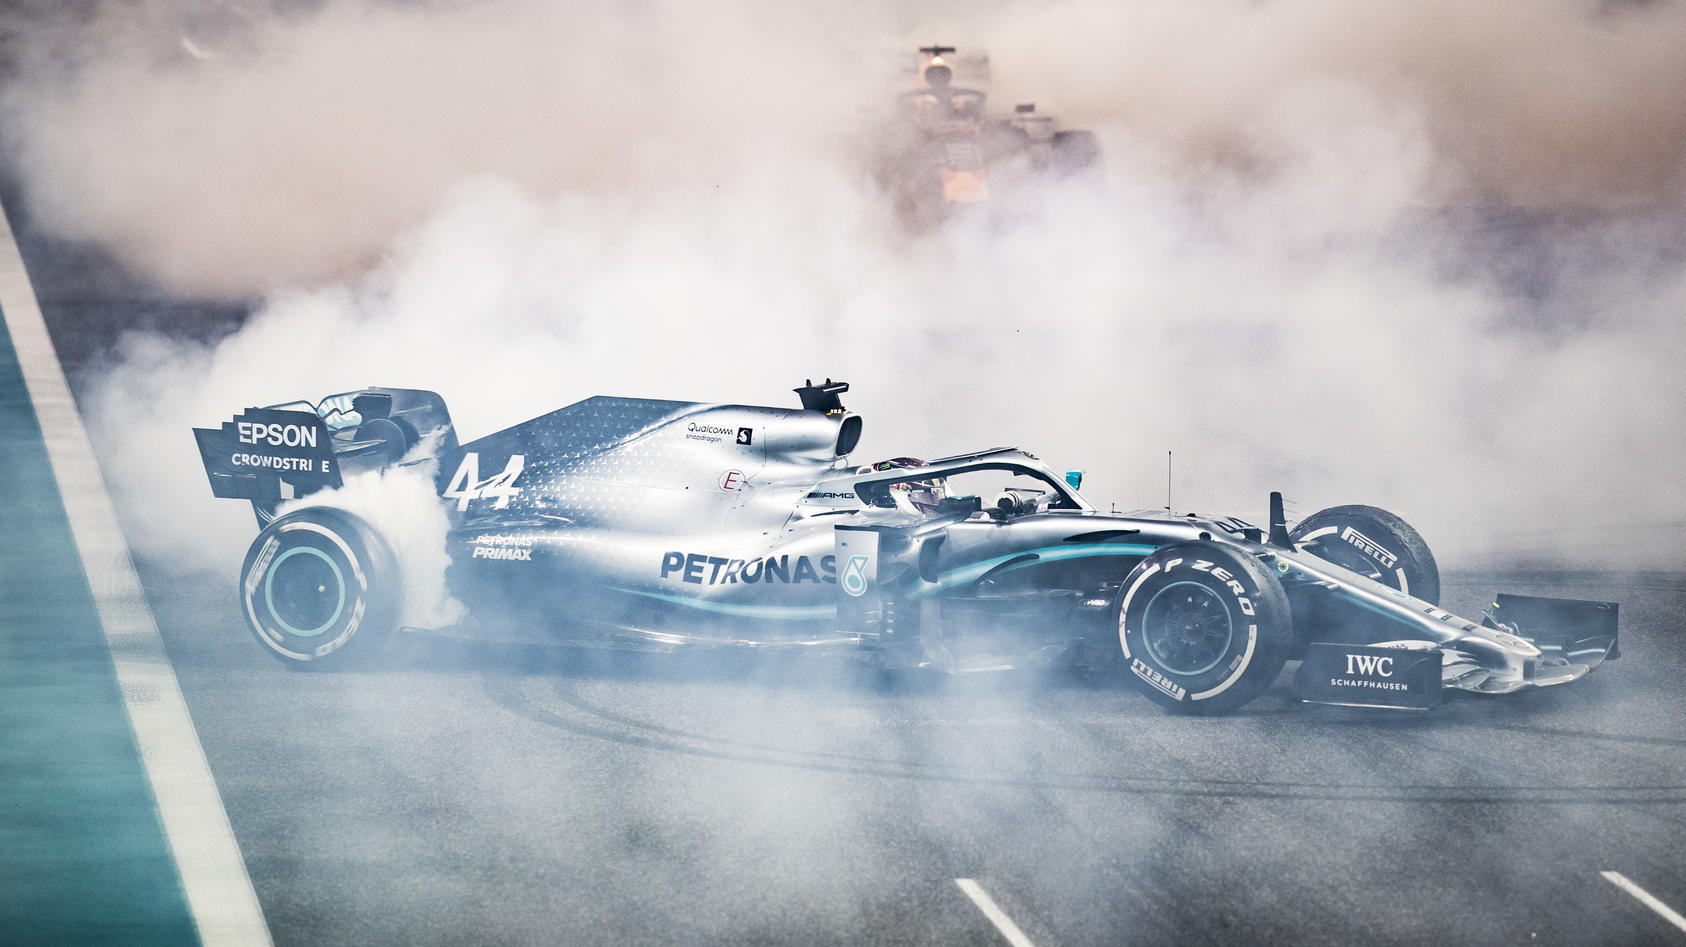 Sport Bilder des Tages 2019 Abu Dhabi GP YAS MARINA CIRCUIT, UNITED ARAB EMIRATES - DECEMBER 01: Max Verstappen, Red Bull Racing RB15, 2nd position, and Lewis Hamilton, Mercedes AMG F1 W10, 1st position, perform donuts in celebration at the end of th